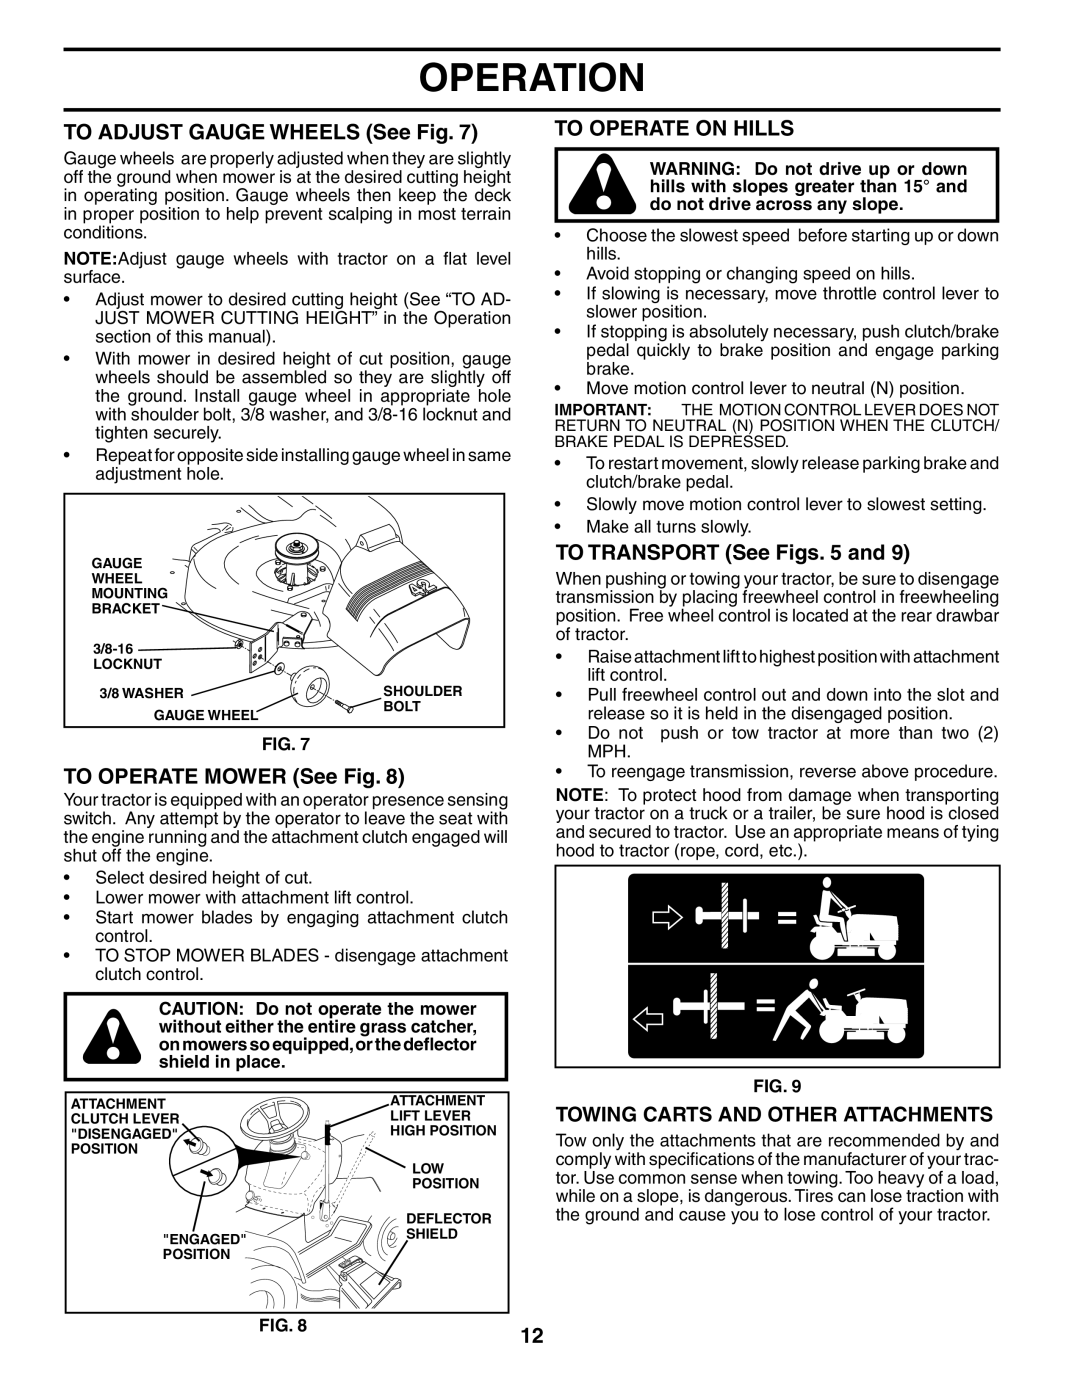 Husqvarna YTH2242 owner manual TO ADJUST GAUGE WHEELS See Fig, To Operate On Hills, TO TRANSPORT See Figs. 5 and, Operation 